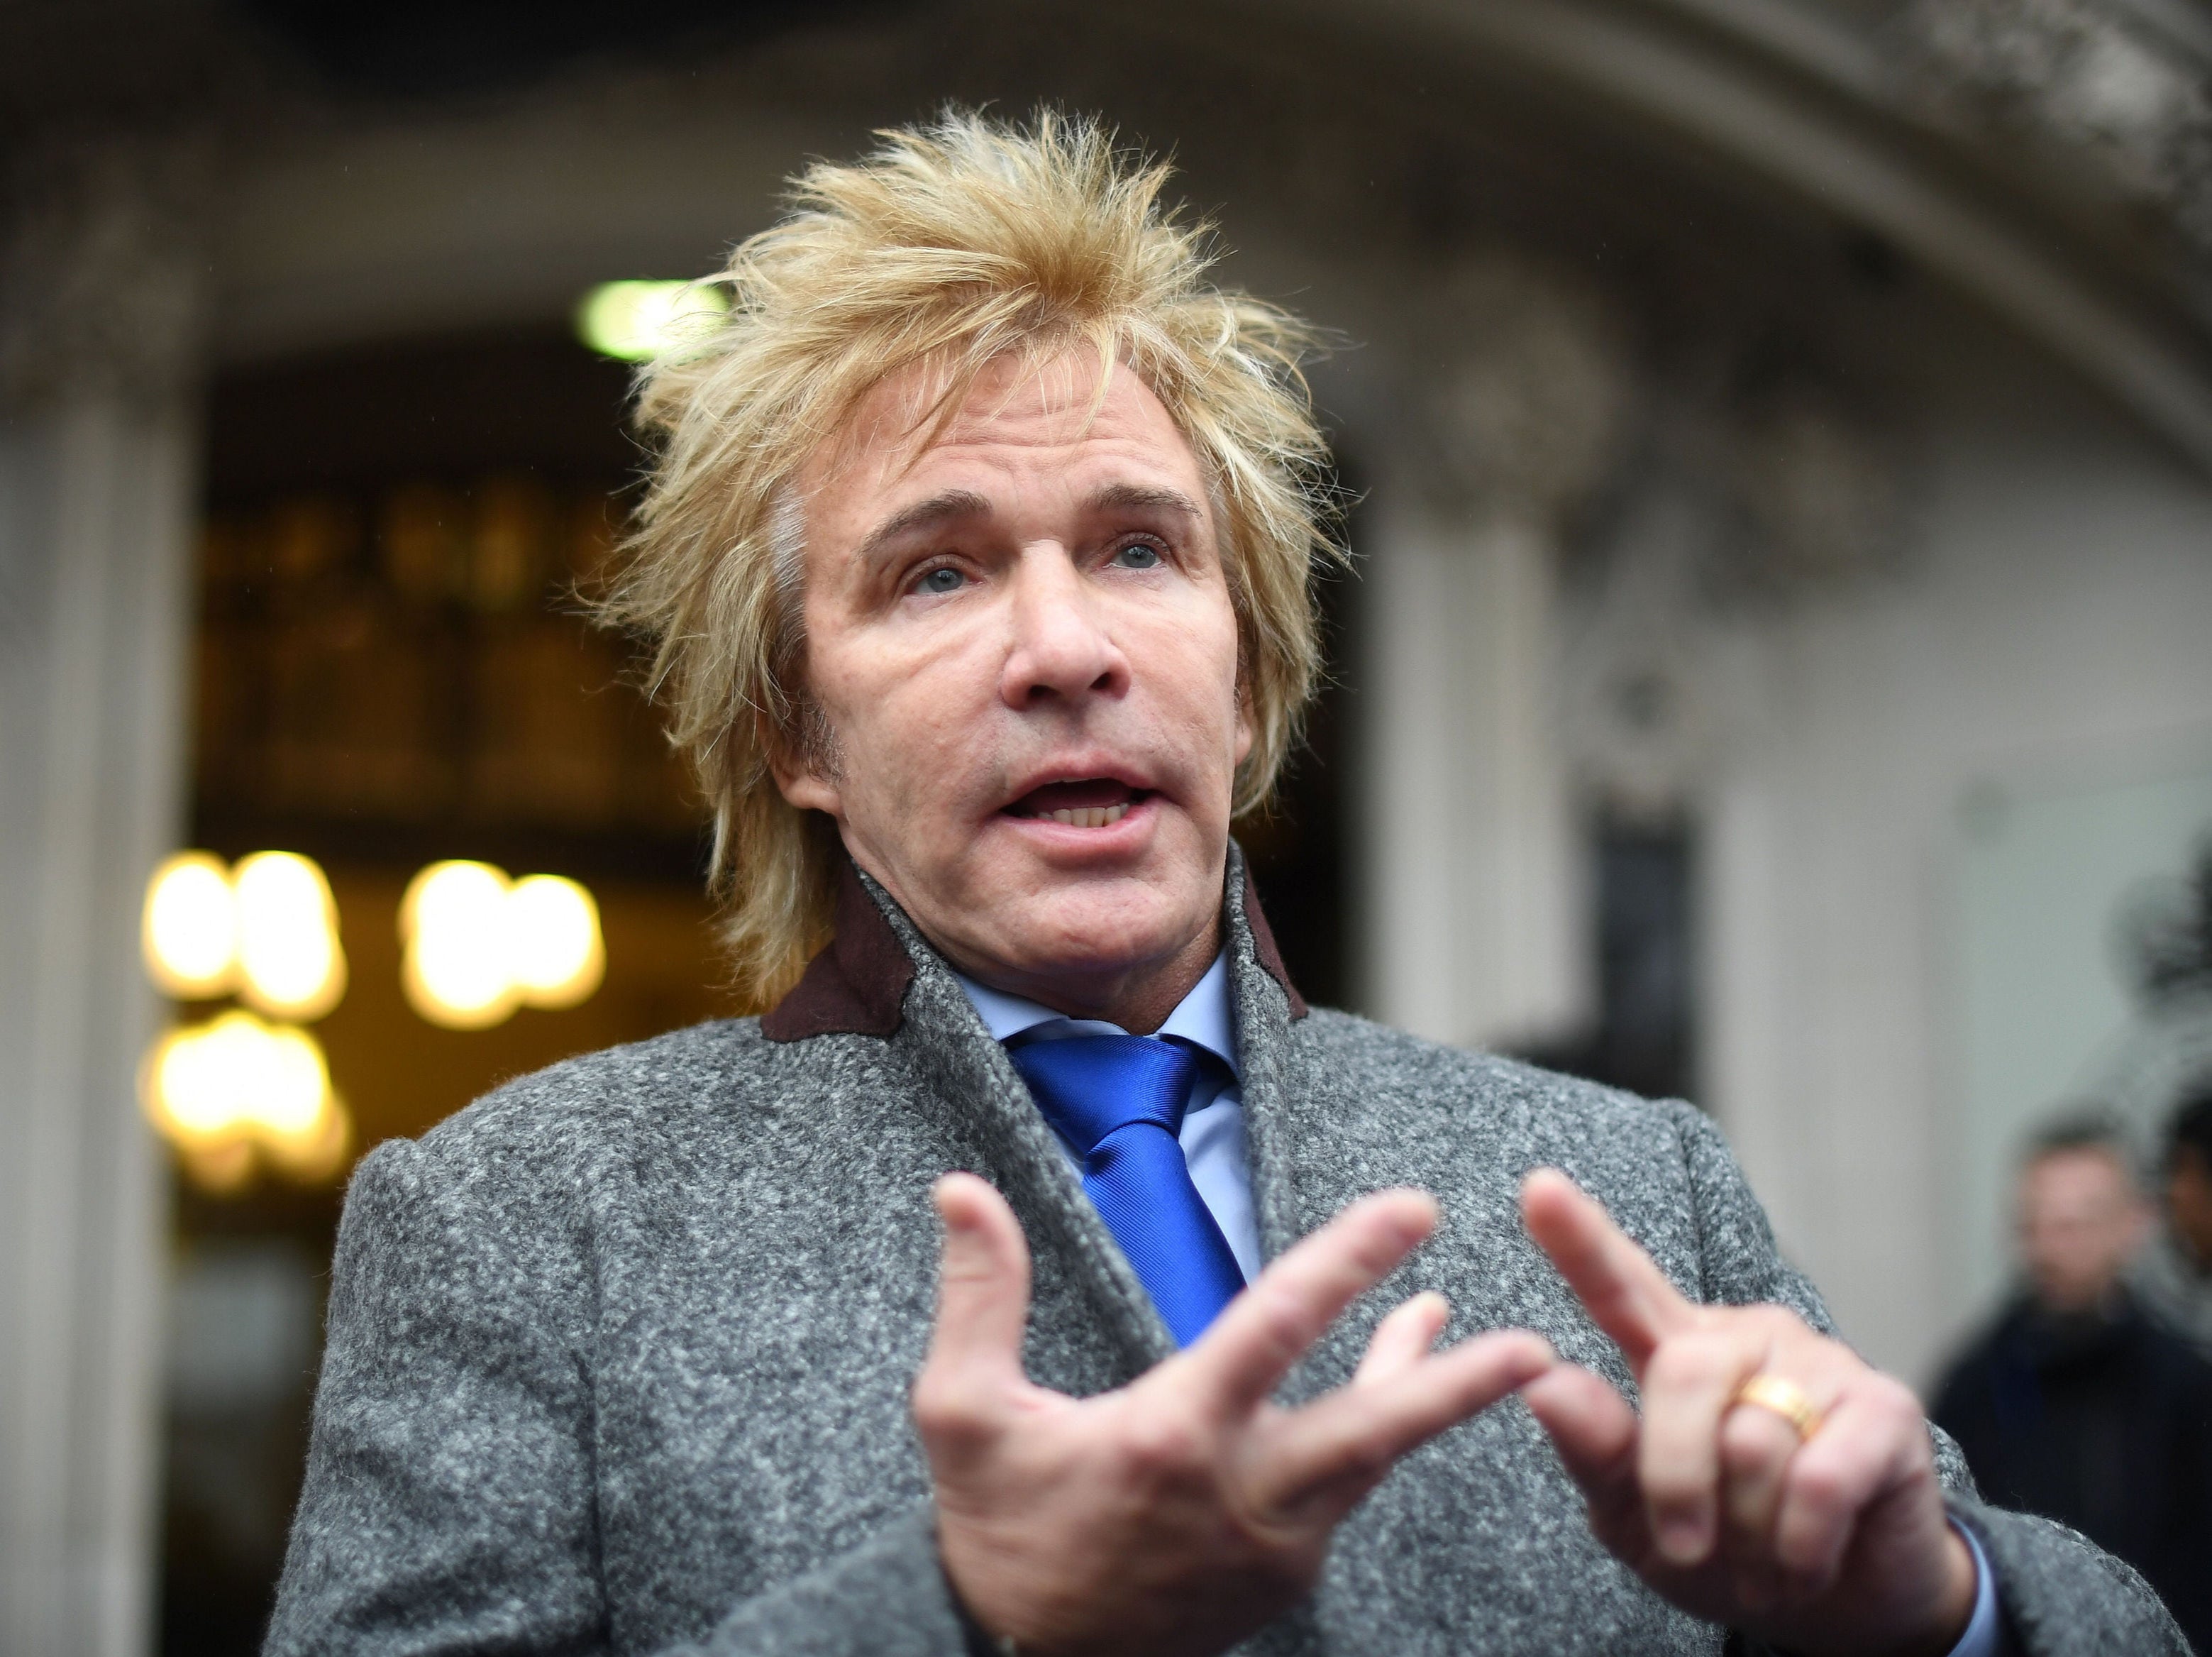 Pimlico Plumbers founder Charlie Mullins has claimed Britons would “crawl across snow naked” to get a coronavirus vaccine